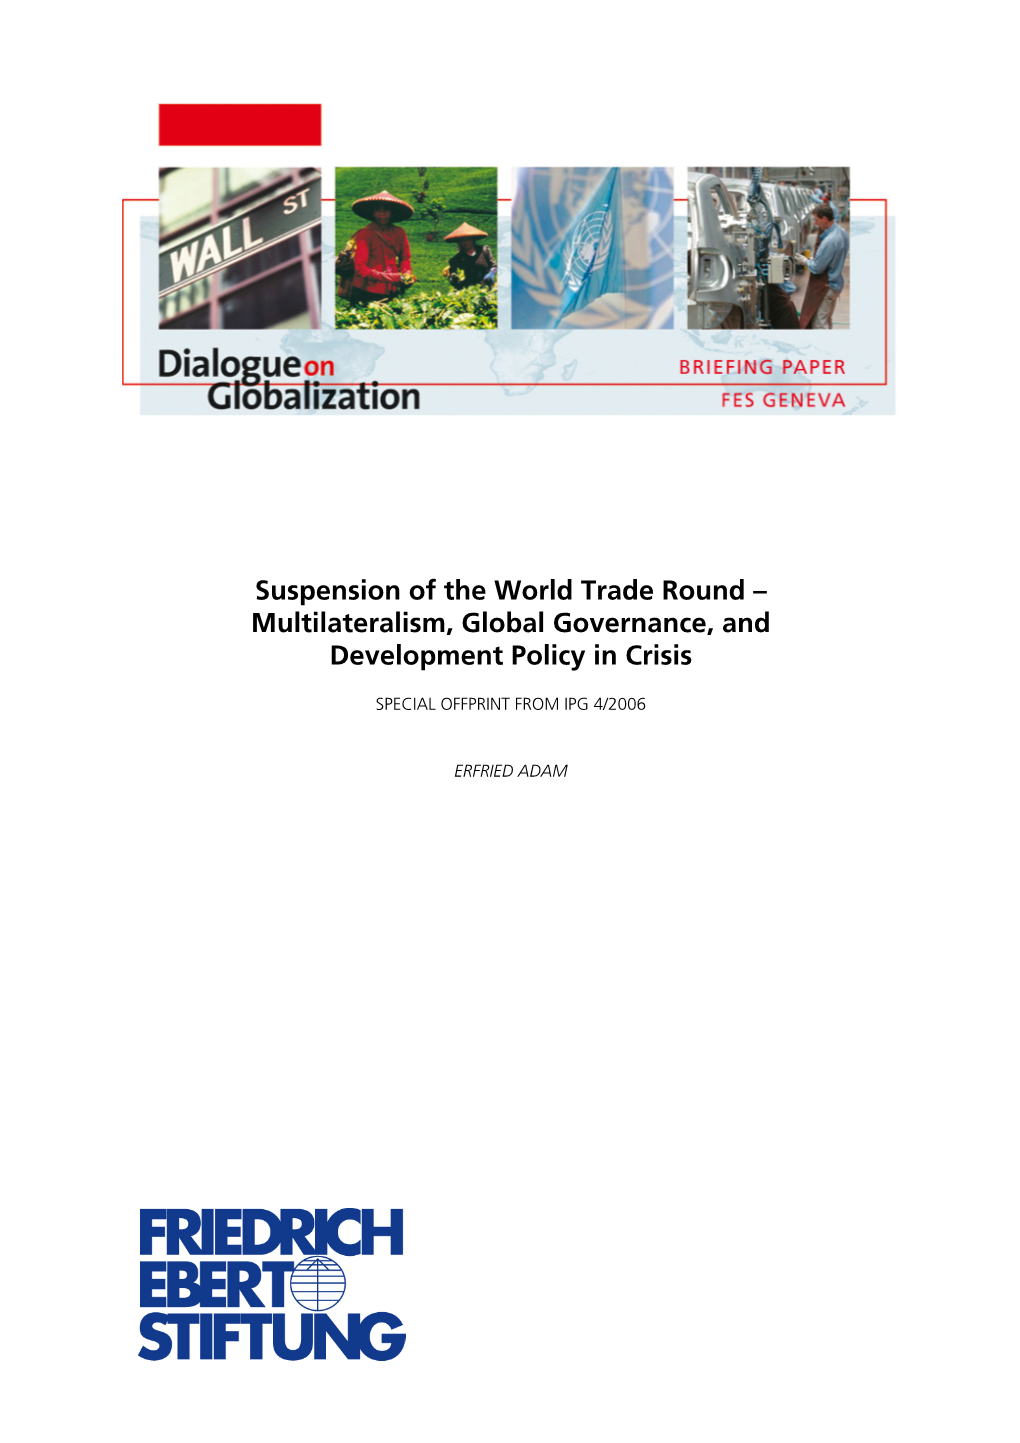 Suspension of the World Trade Round – Multilateralism, Global Governance, and Development Policy in Crisis